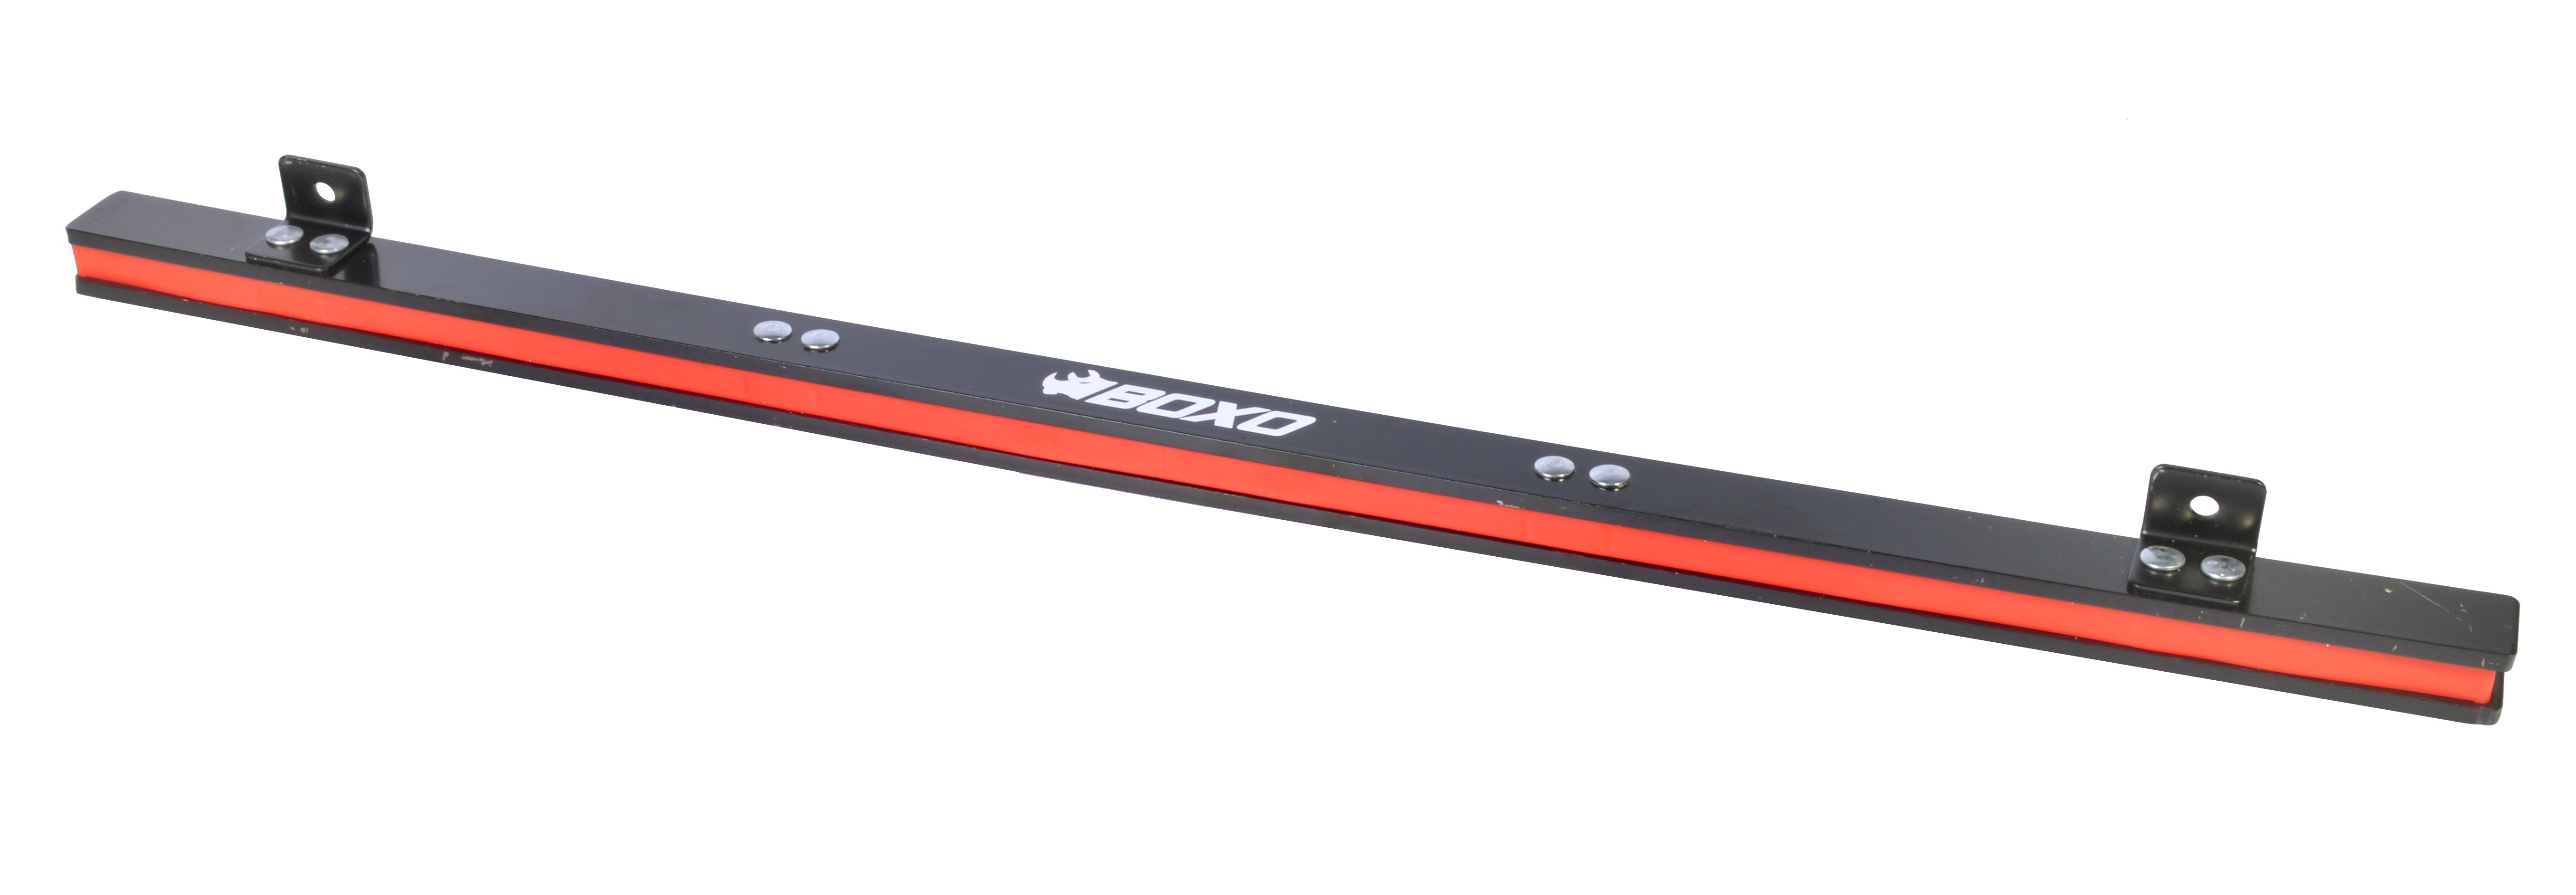 BOXO 610mm Magnetic Rail - Green or Red